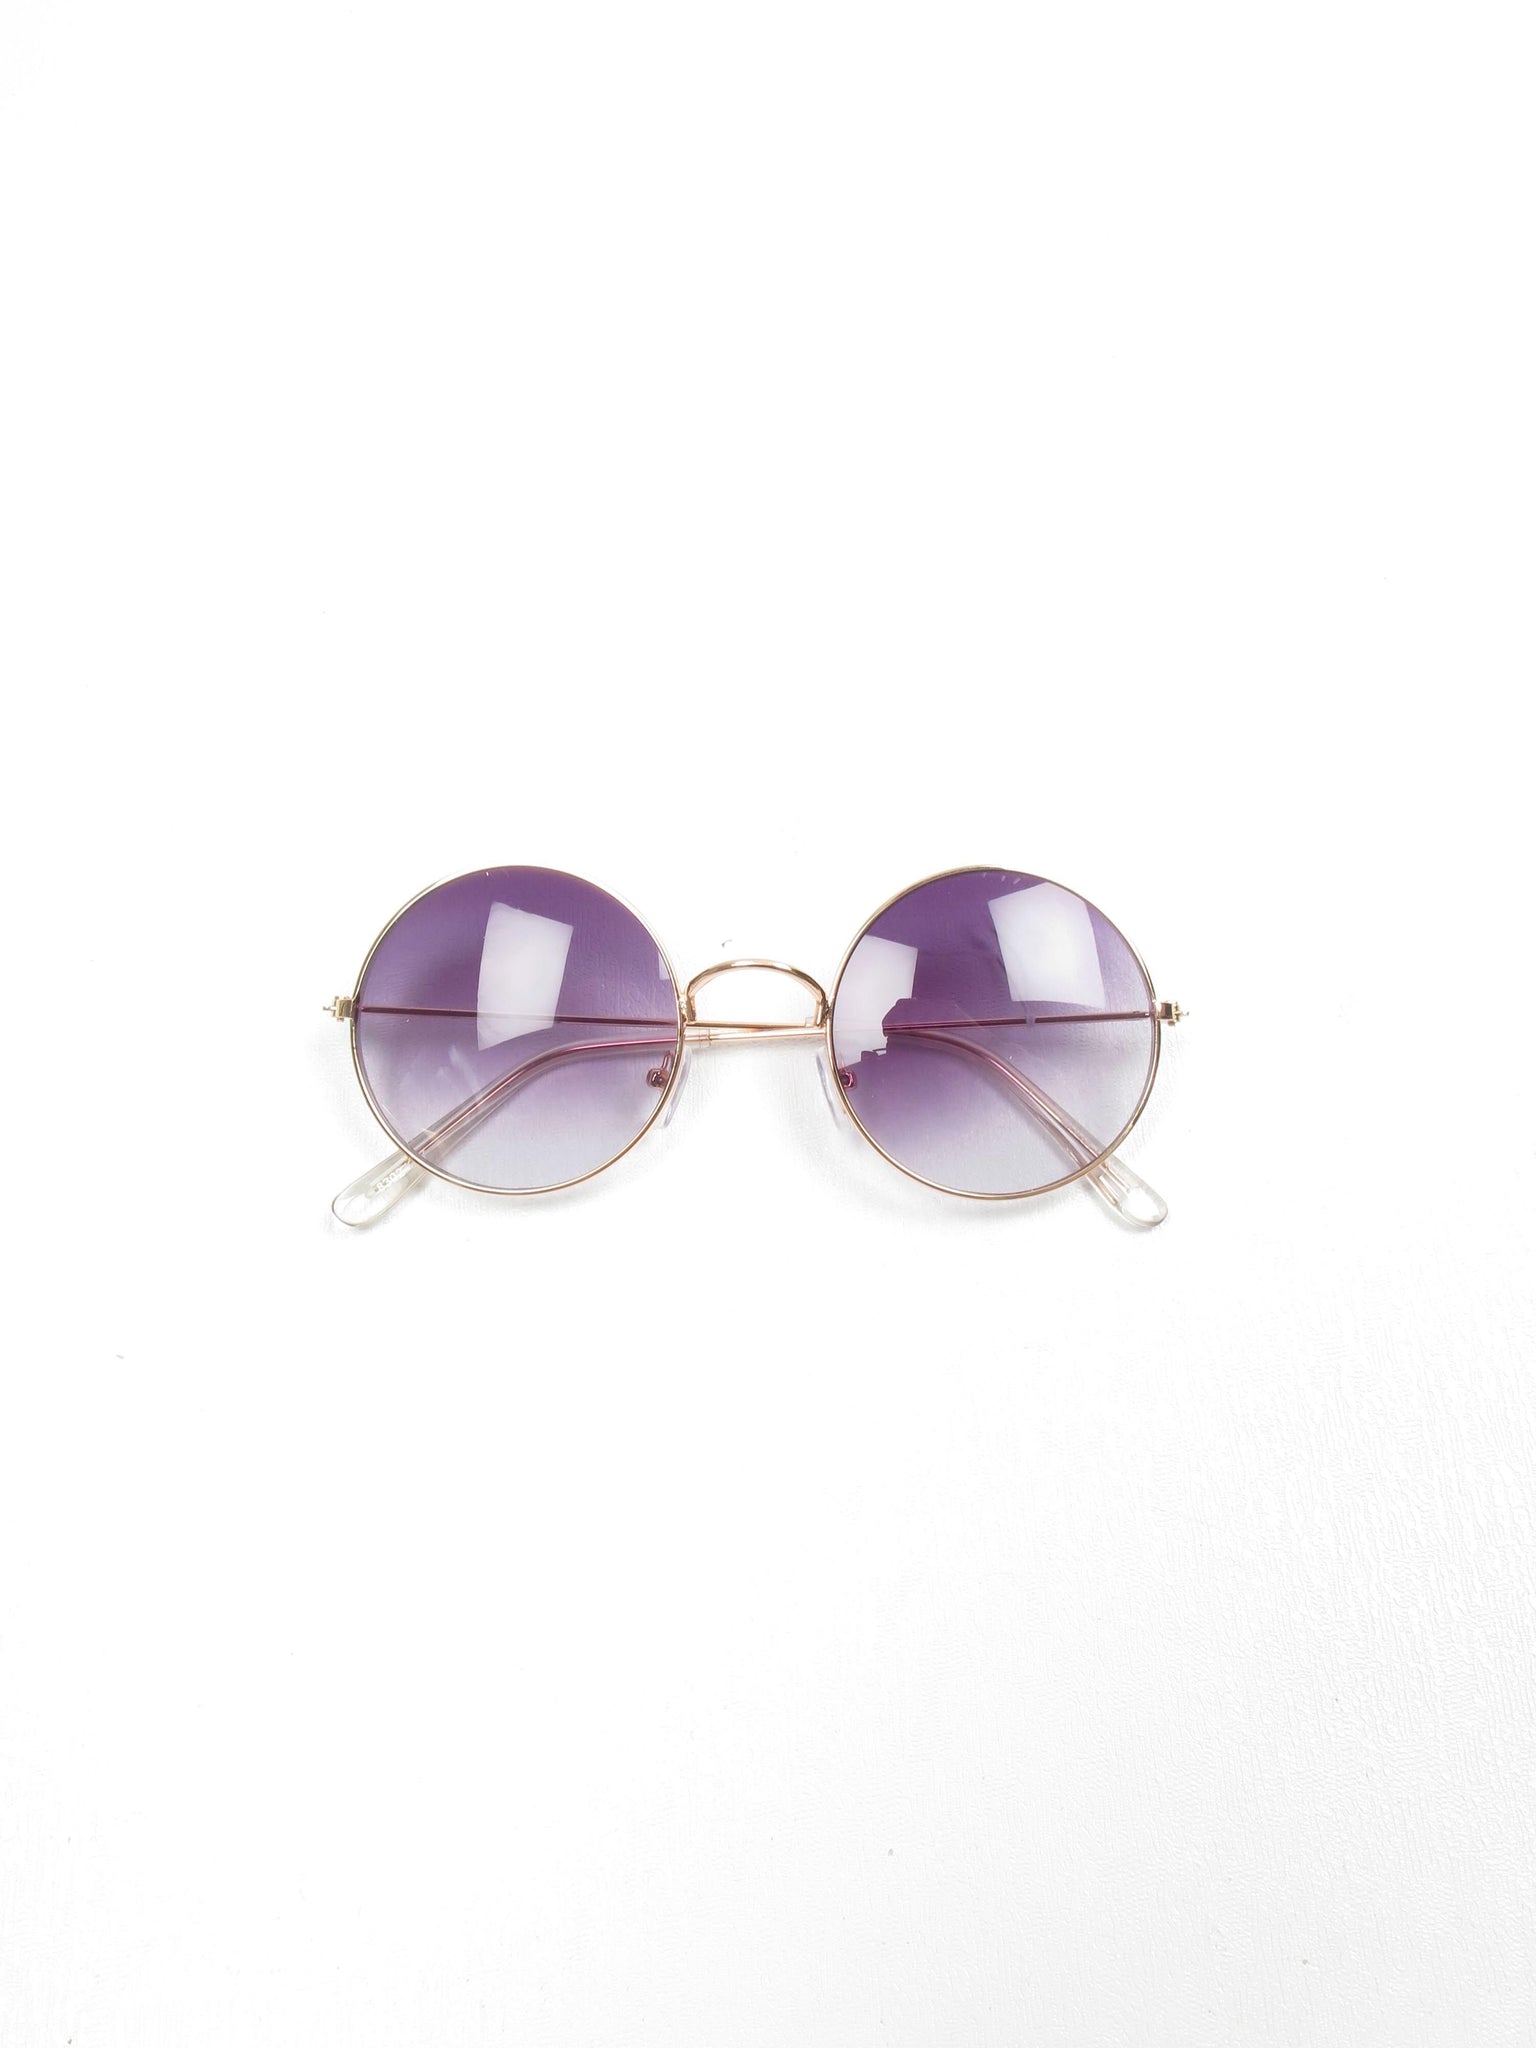 Lennon Style Round Sunglasses with Brown ,Purple,Pink Lenses (Medium) - The Harlequin